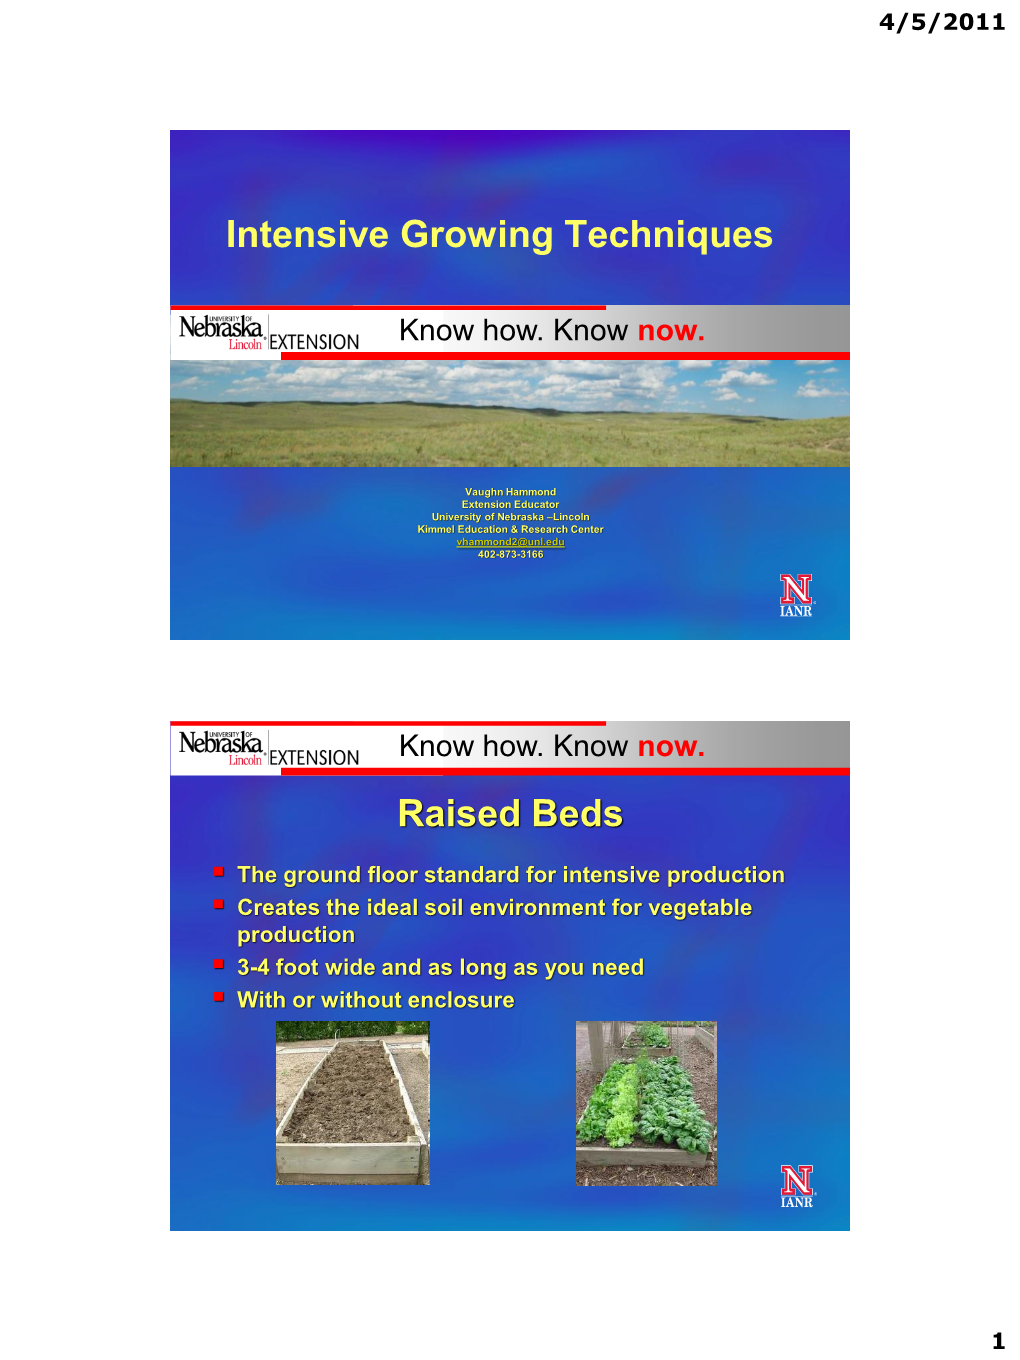 Intensive Growing Techniques Raised Beds